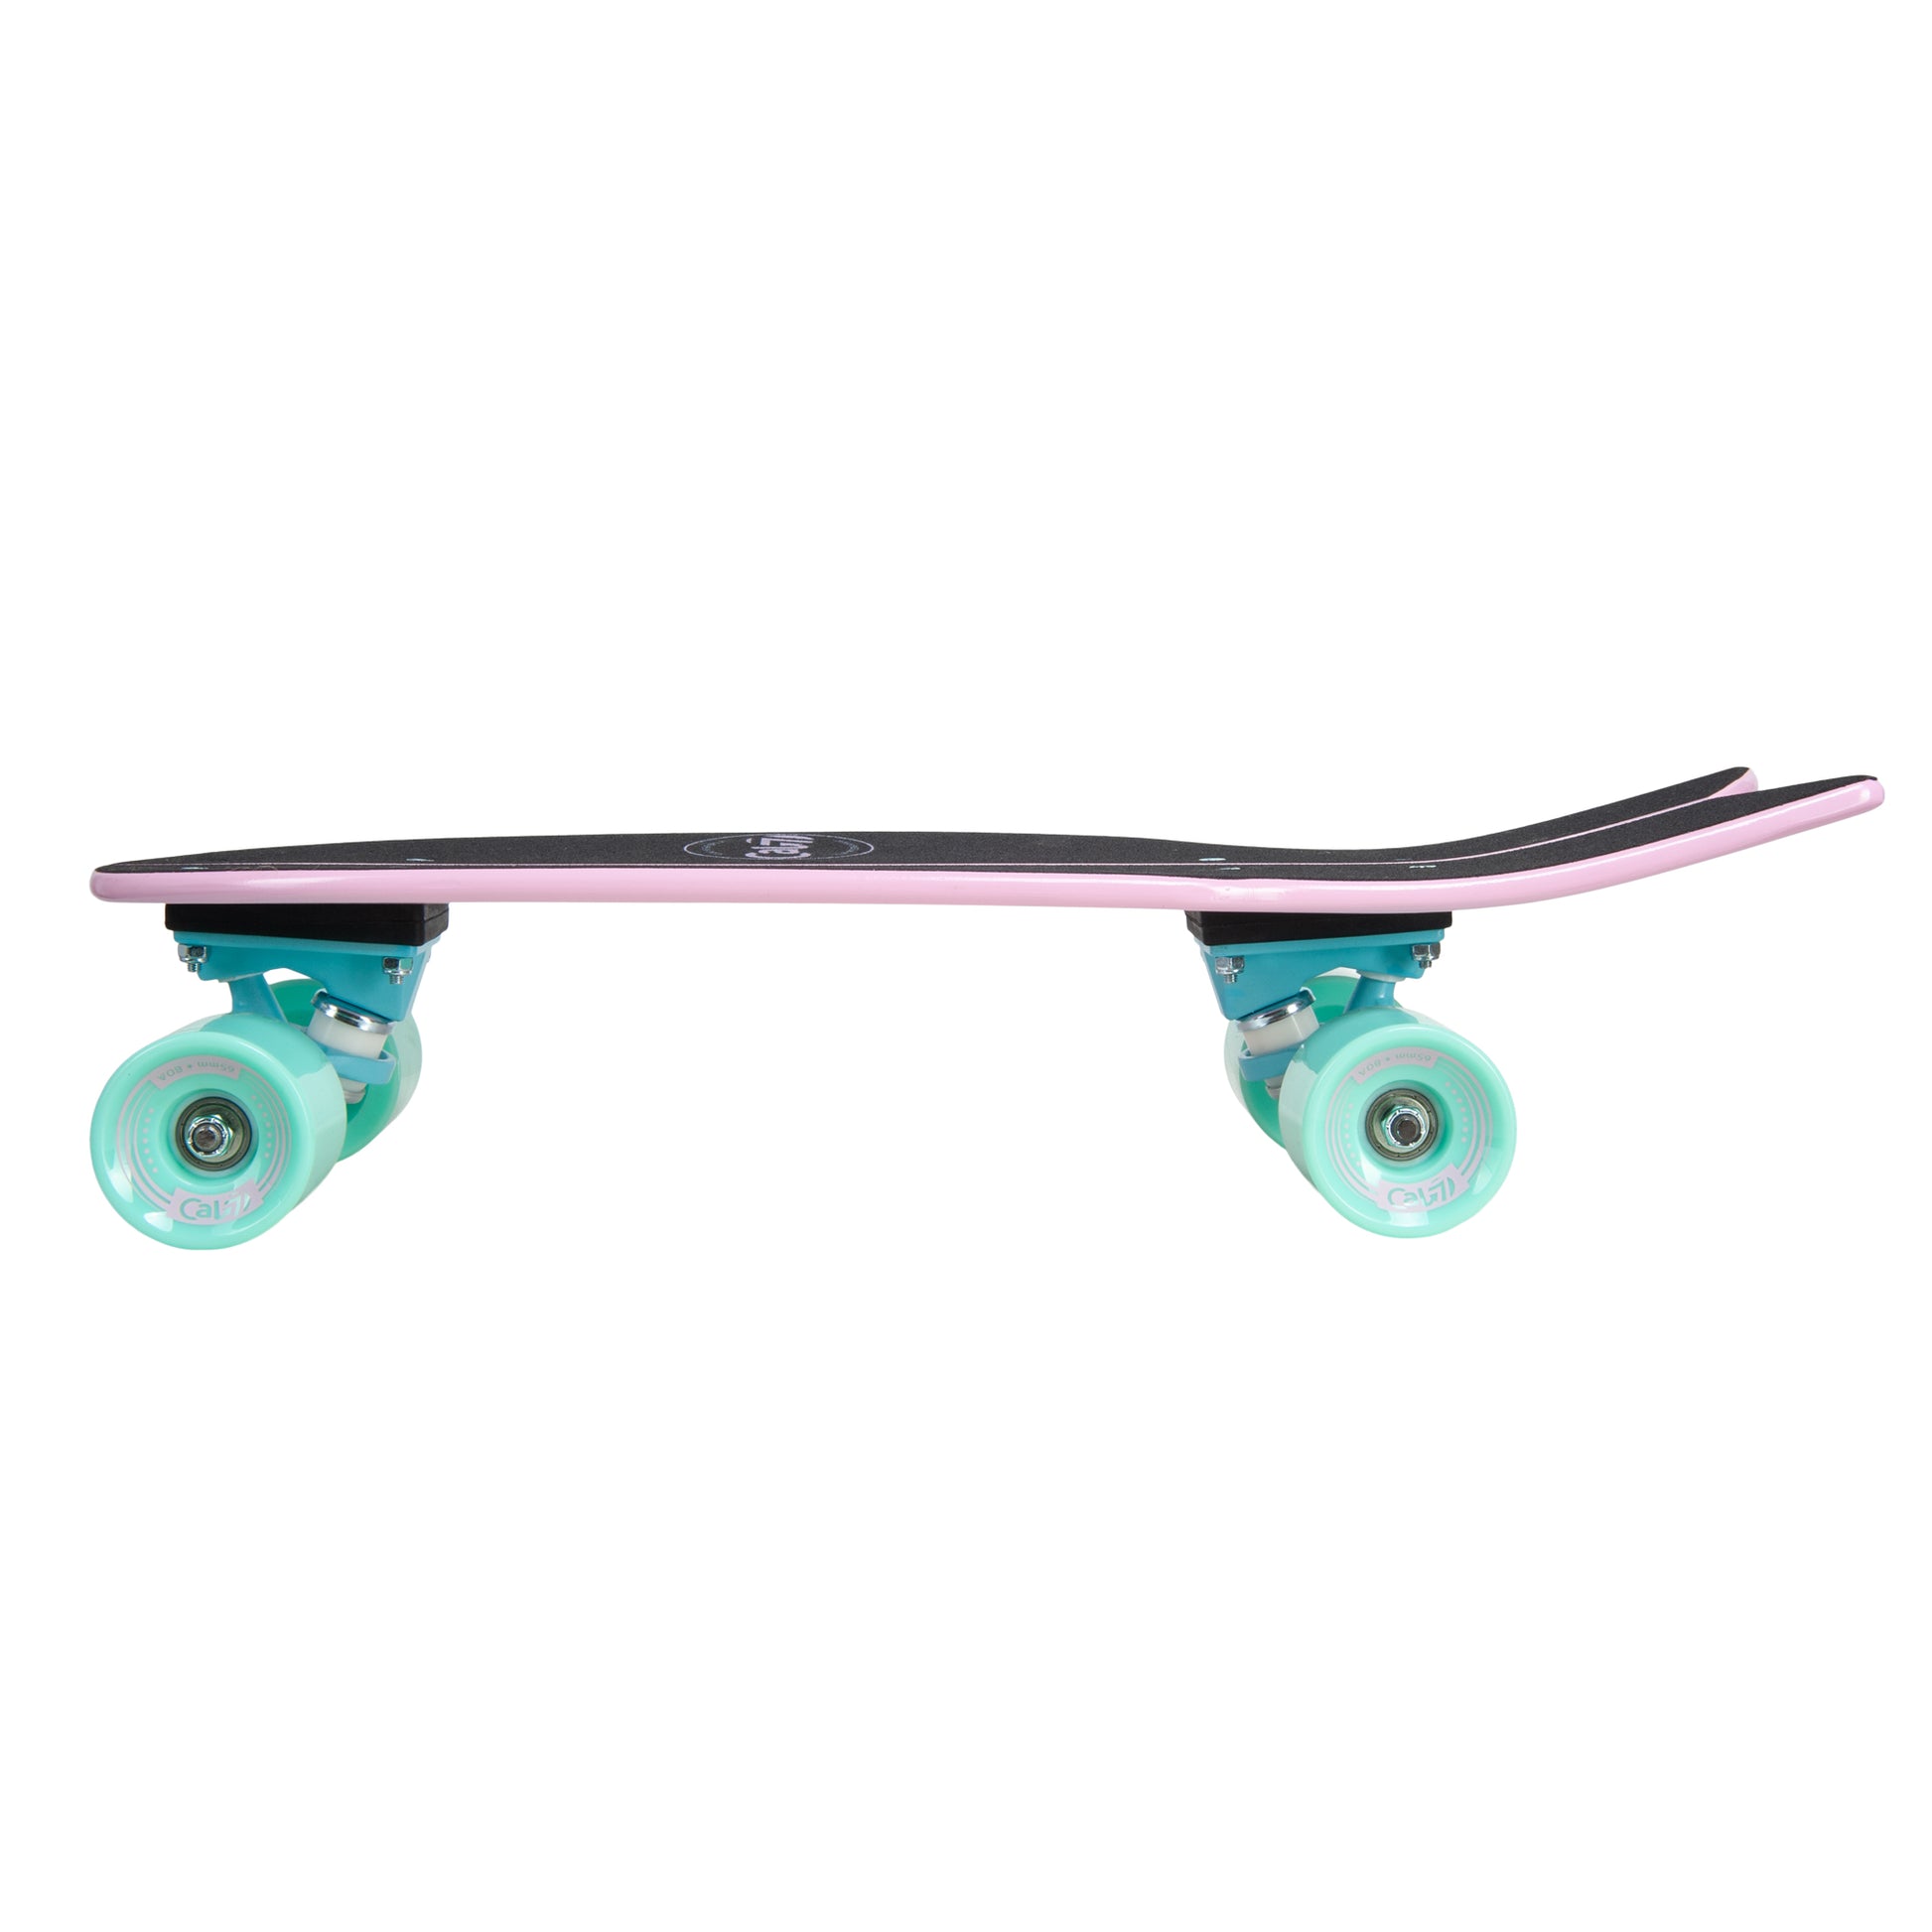 Cal 7 Pansy 22” Fishtail Mini Cruiser pink deck with turquoise 65mm 80A wheels and 4.5-inch trucks